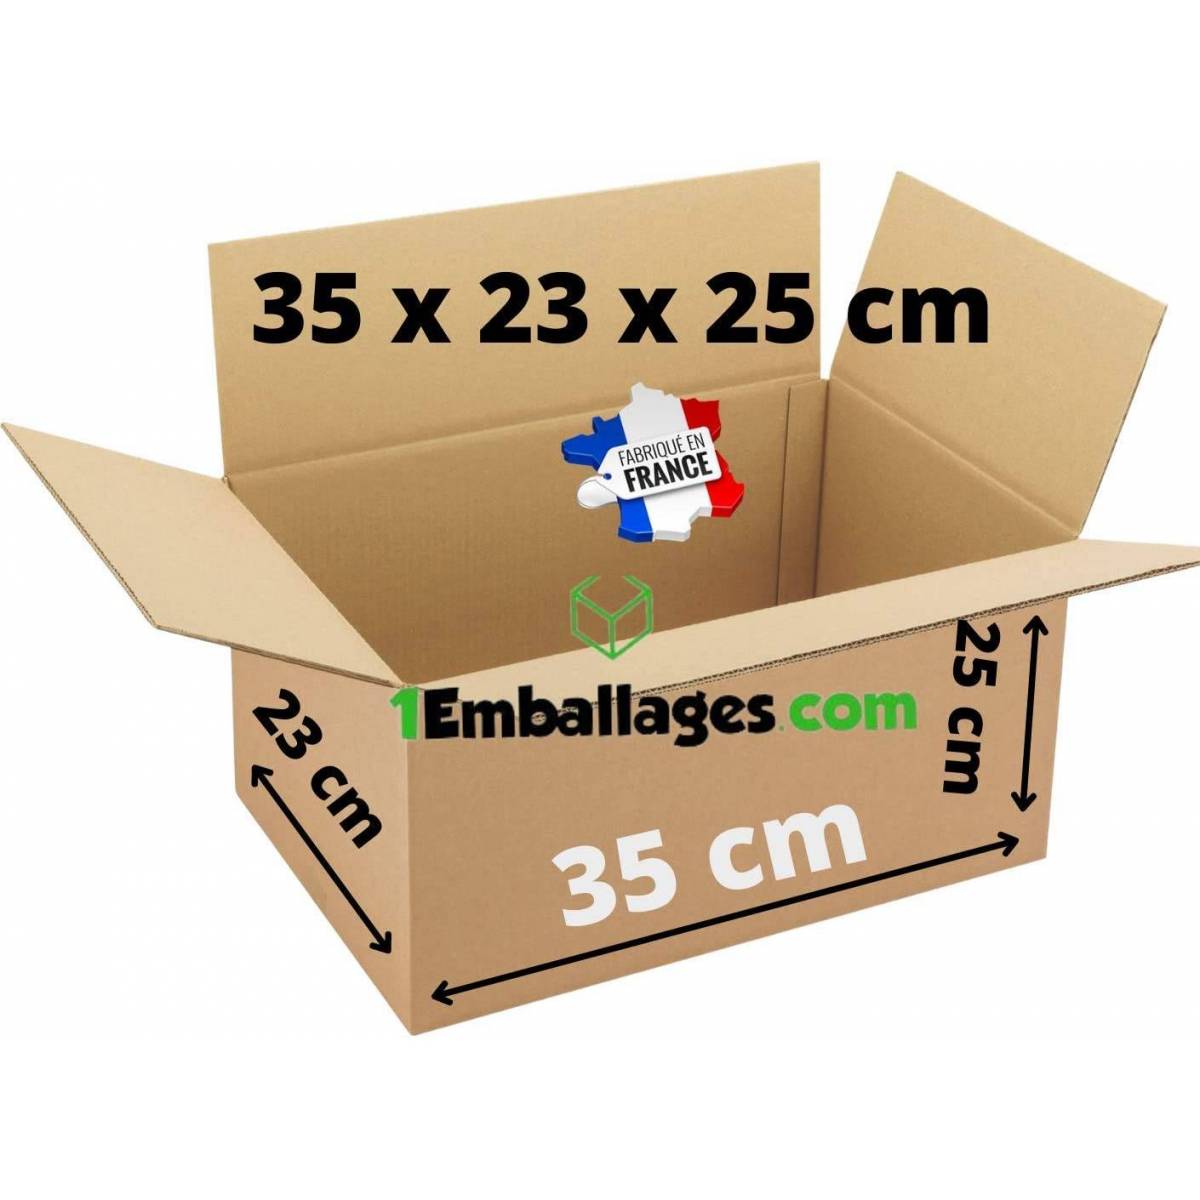 40 Packing boxes, Removals 35X23X25